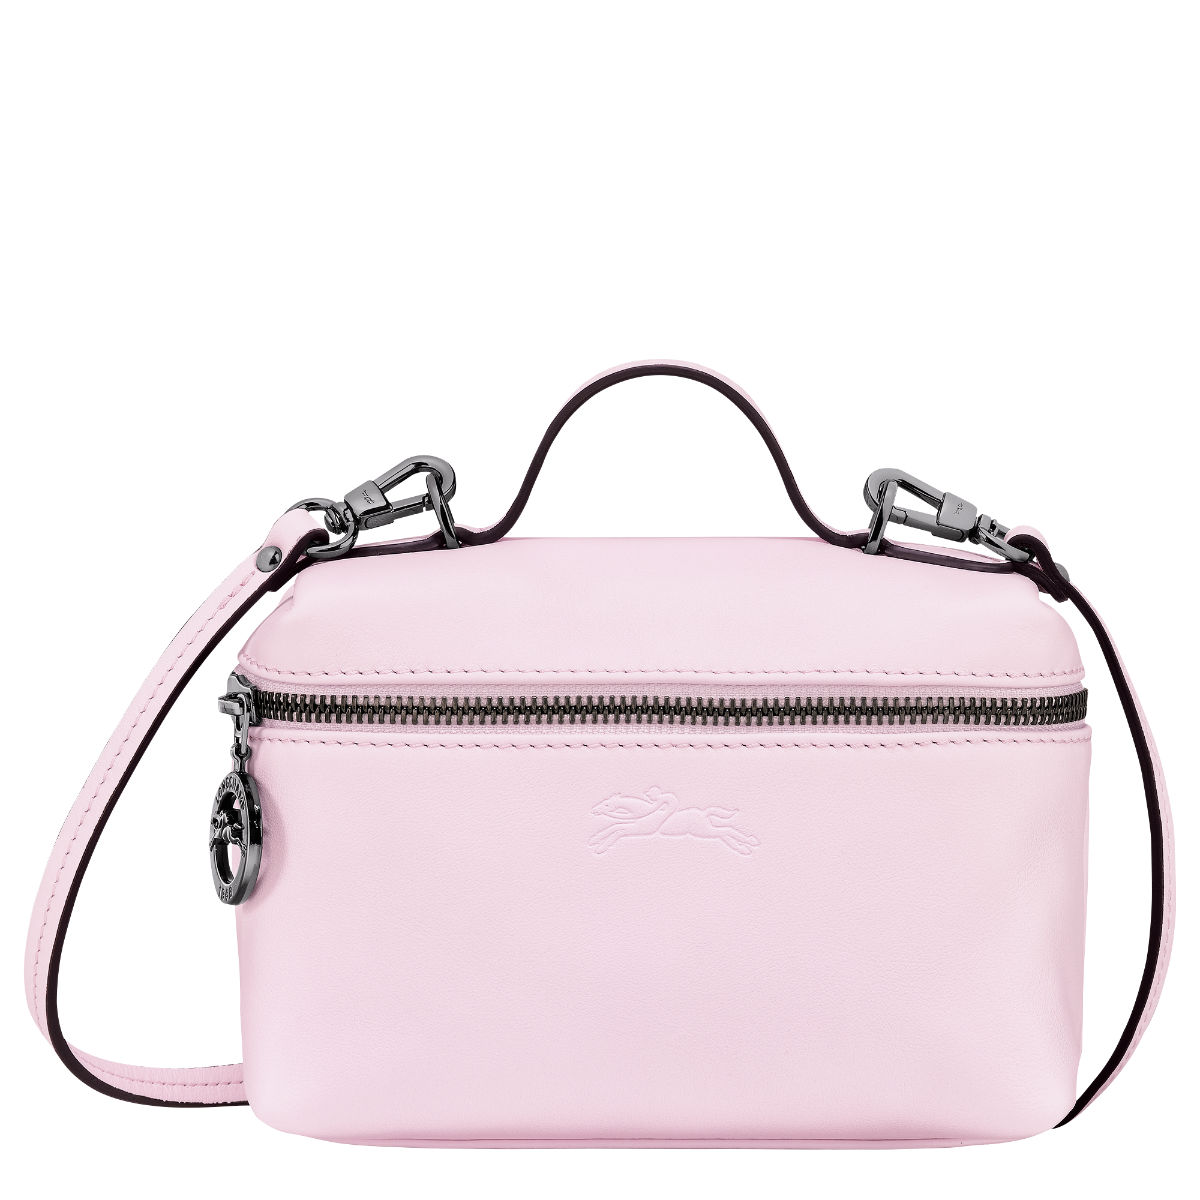 A New Look For Le Pliage Cuir